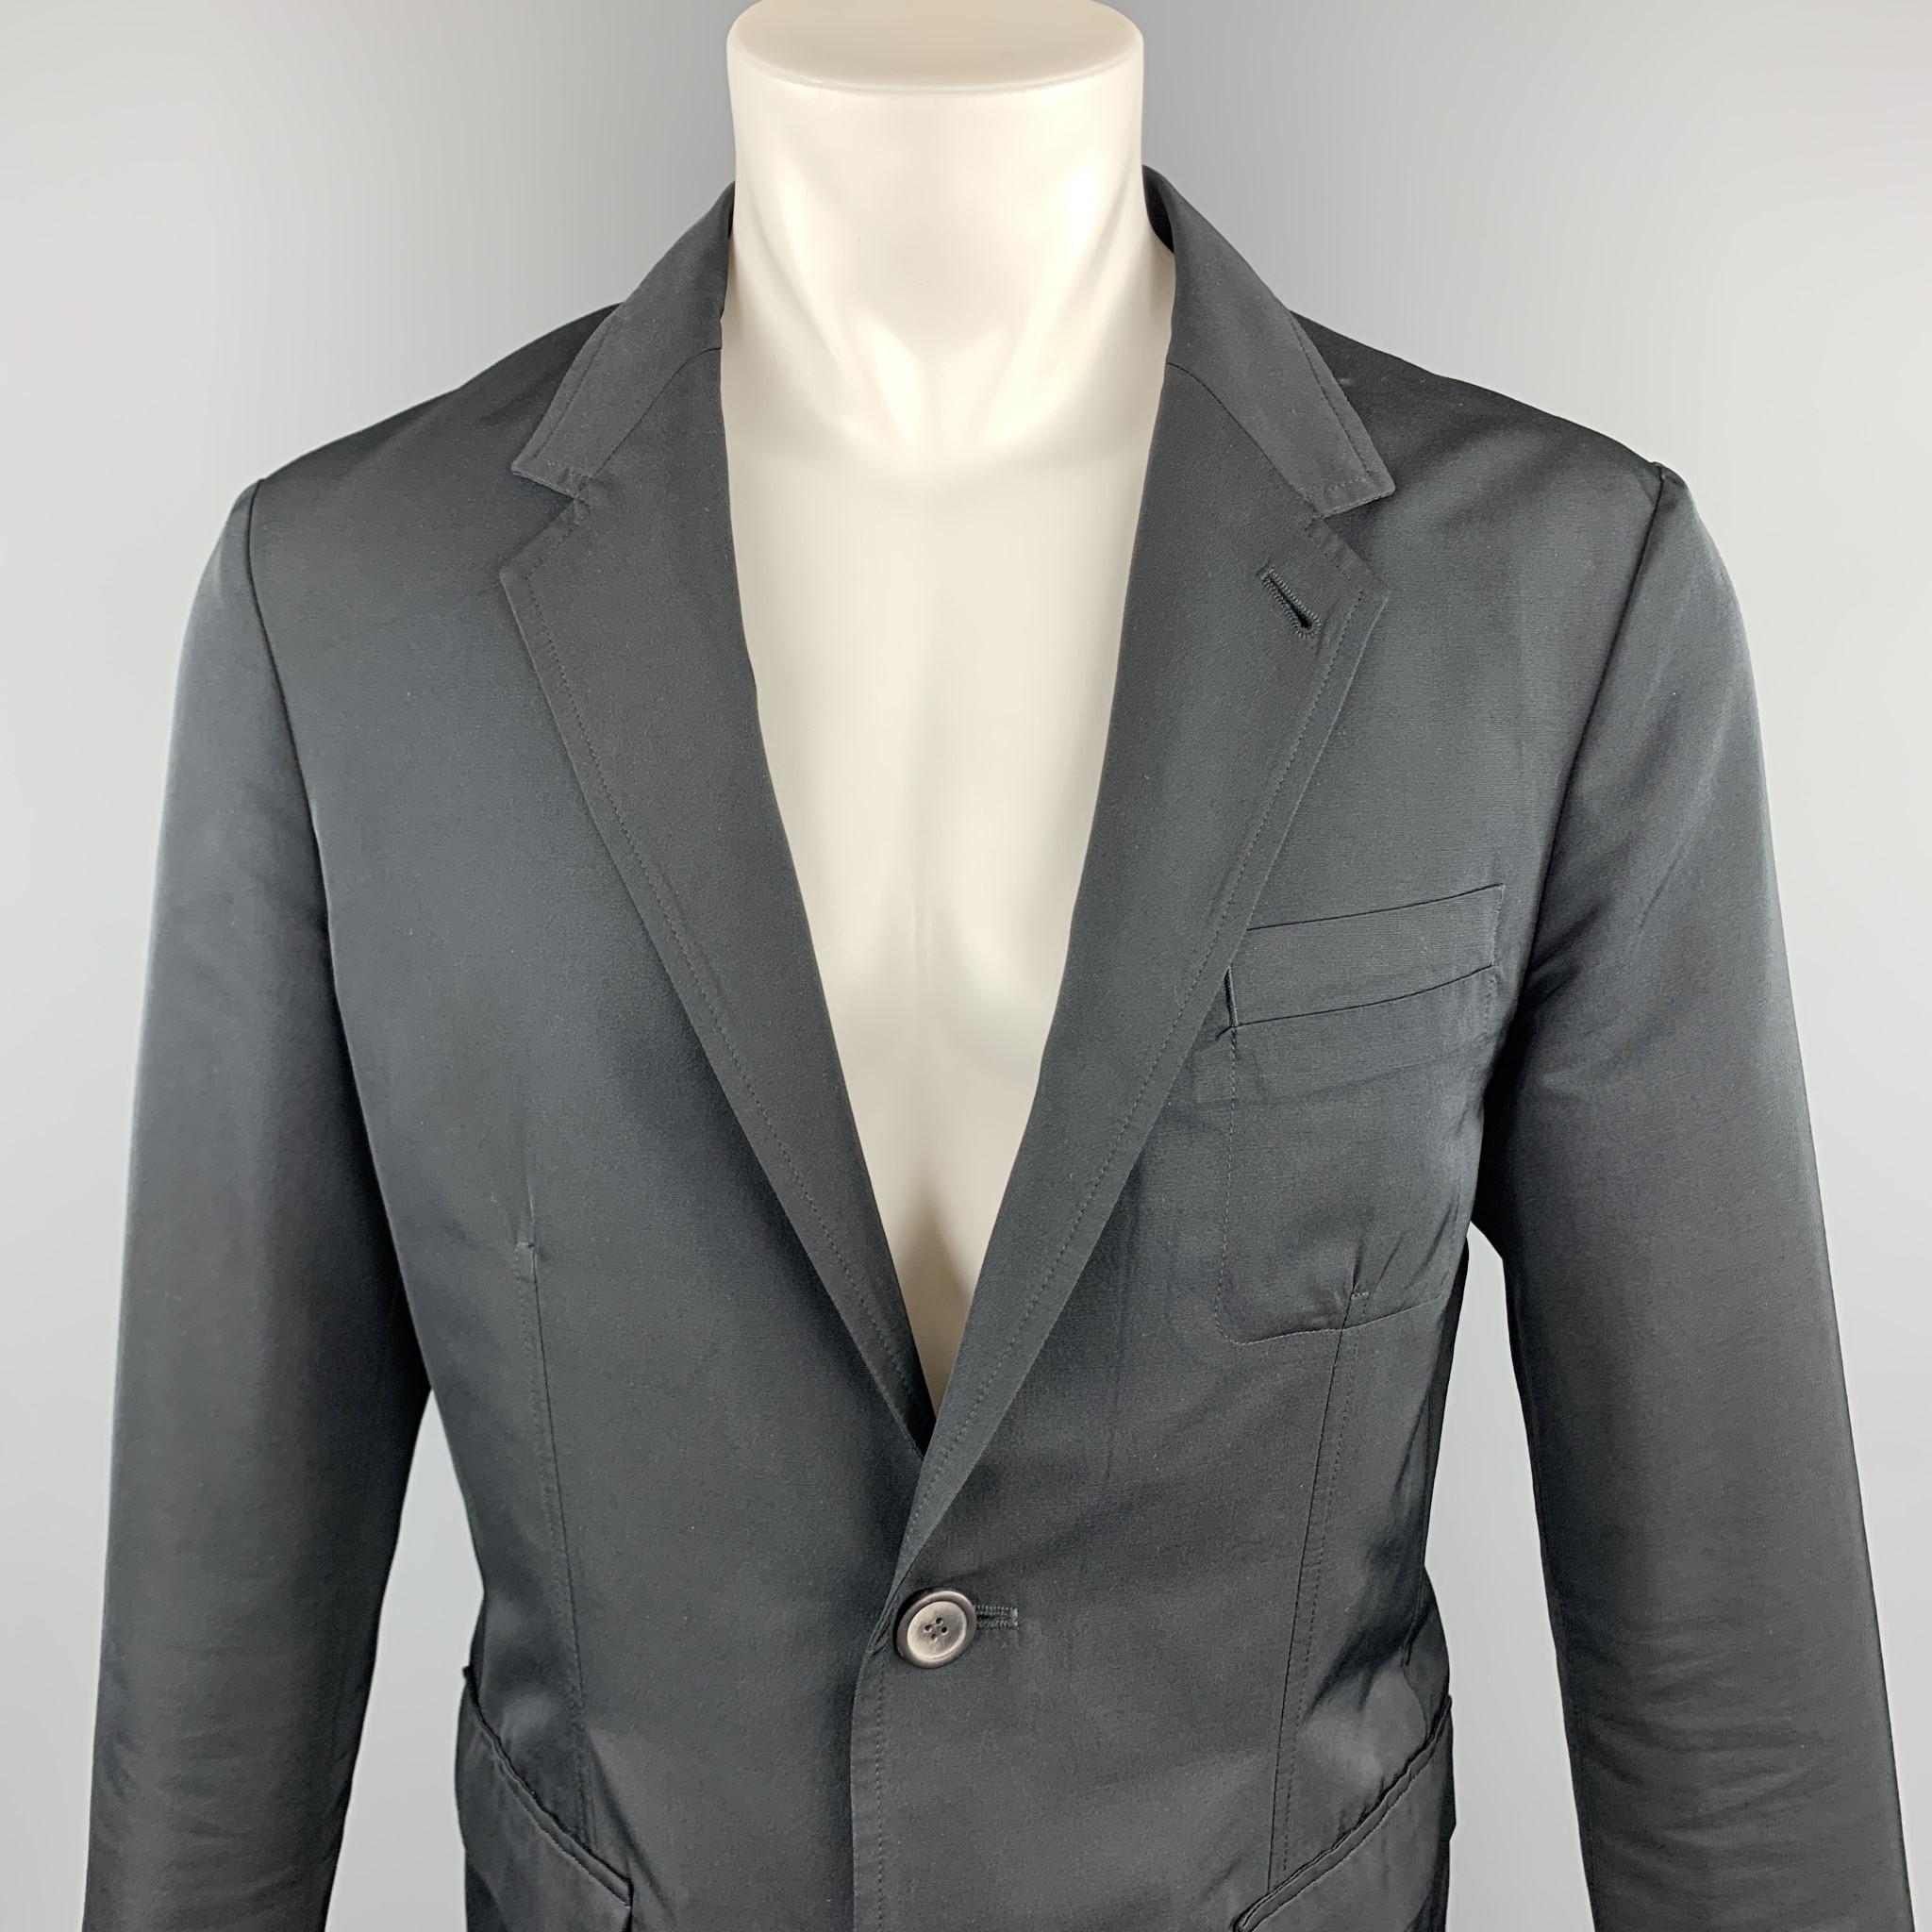 LANVIN sport coat comes in a black polyester / wool featuring a notch lapel style, patch pockets, and a two button closure. Made in Romania.

Excellent Pre-Owned Condition.
Marked: 48

Measurements:

Shoulder: 17 in. 
Chest: 38 in. 
Sleeve: 26 in.